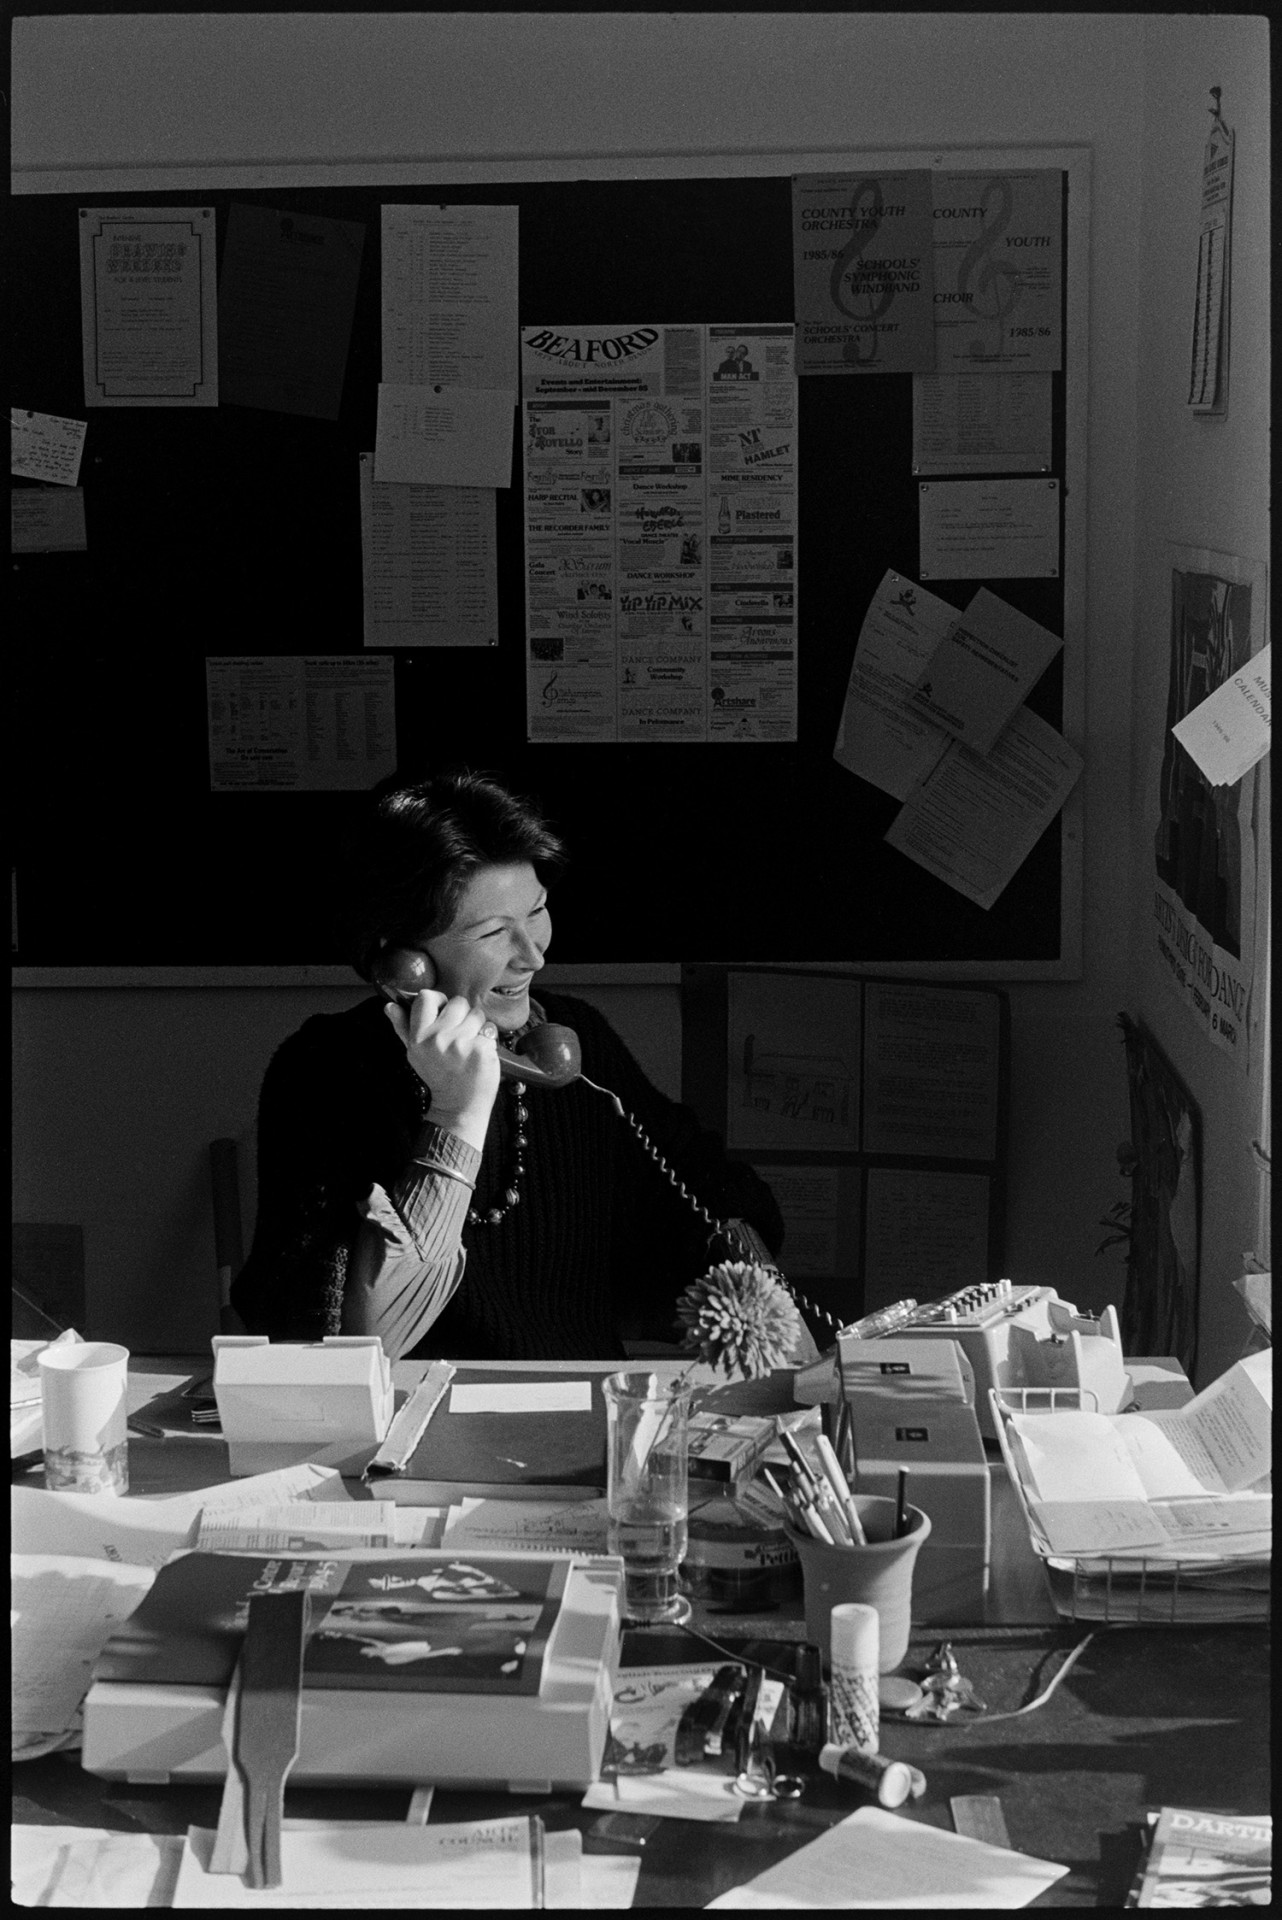 Arts administrator in office on telephone. 
[Shirley Thomas using a telephone in the office at the Beaford Centre at Greenwarren House in Beaford. Various papers are on the desk in front of her.]